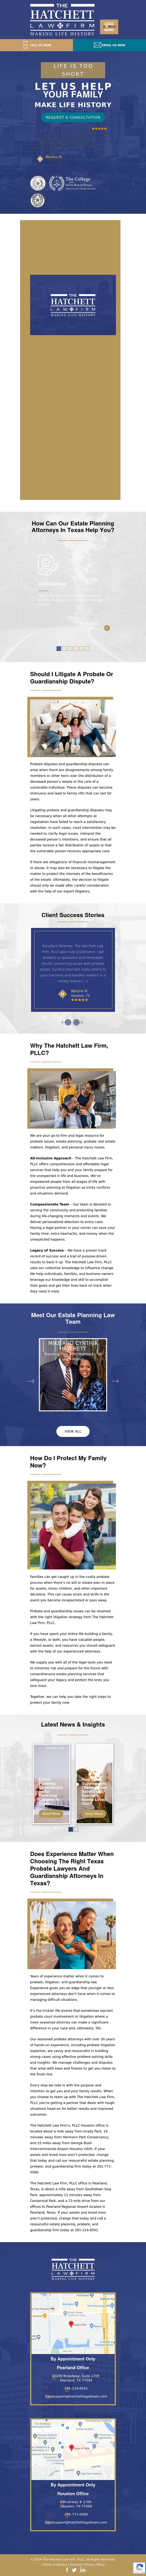 The Hatchett Law Firm - Pearland TX Lawyers